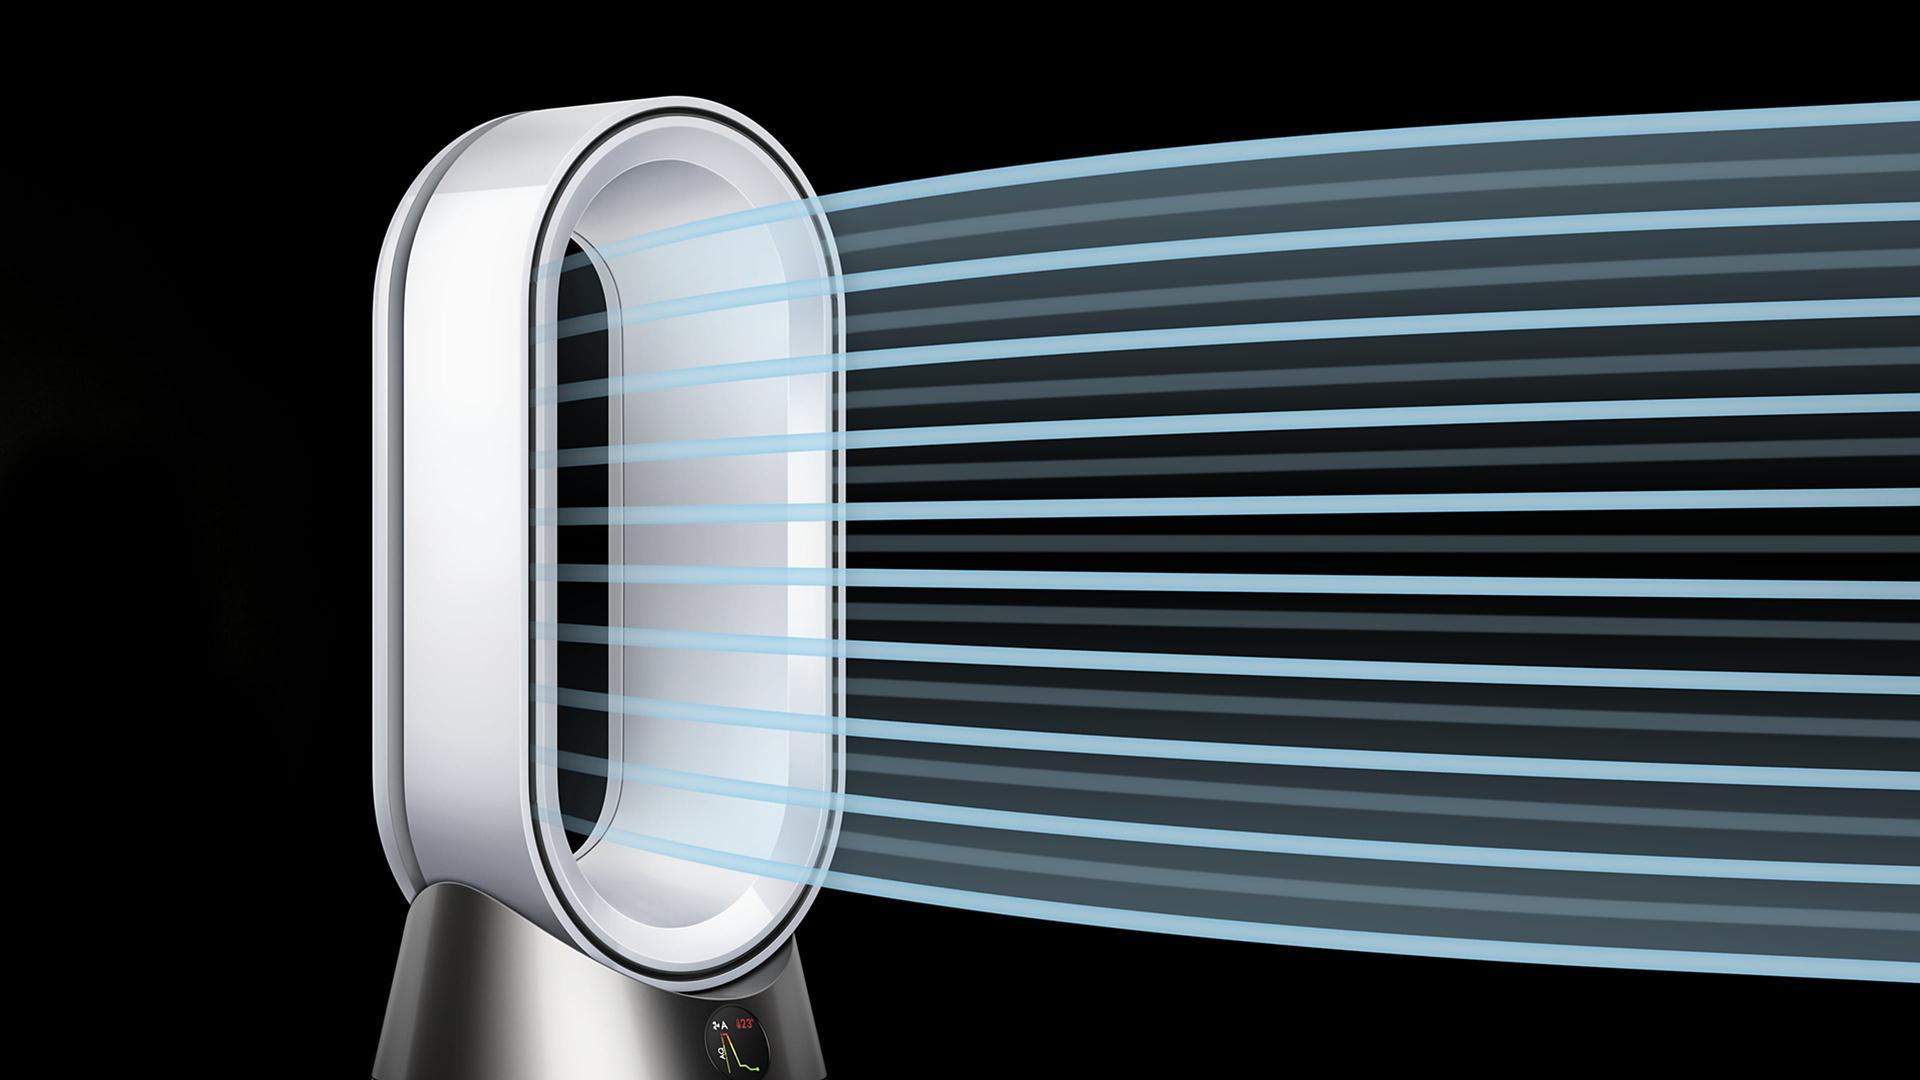 Dyson air purifier releasing air shown through the use of blue lines